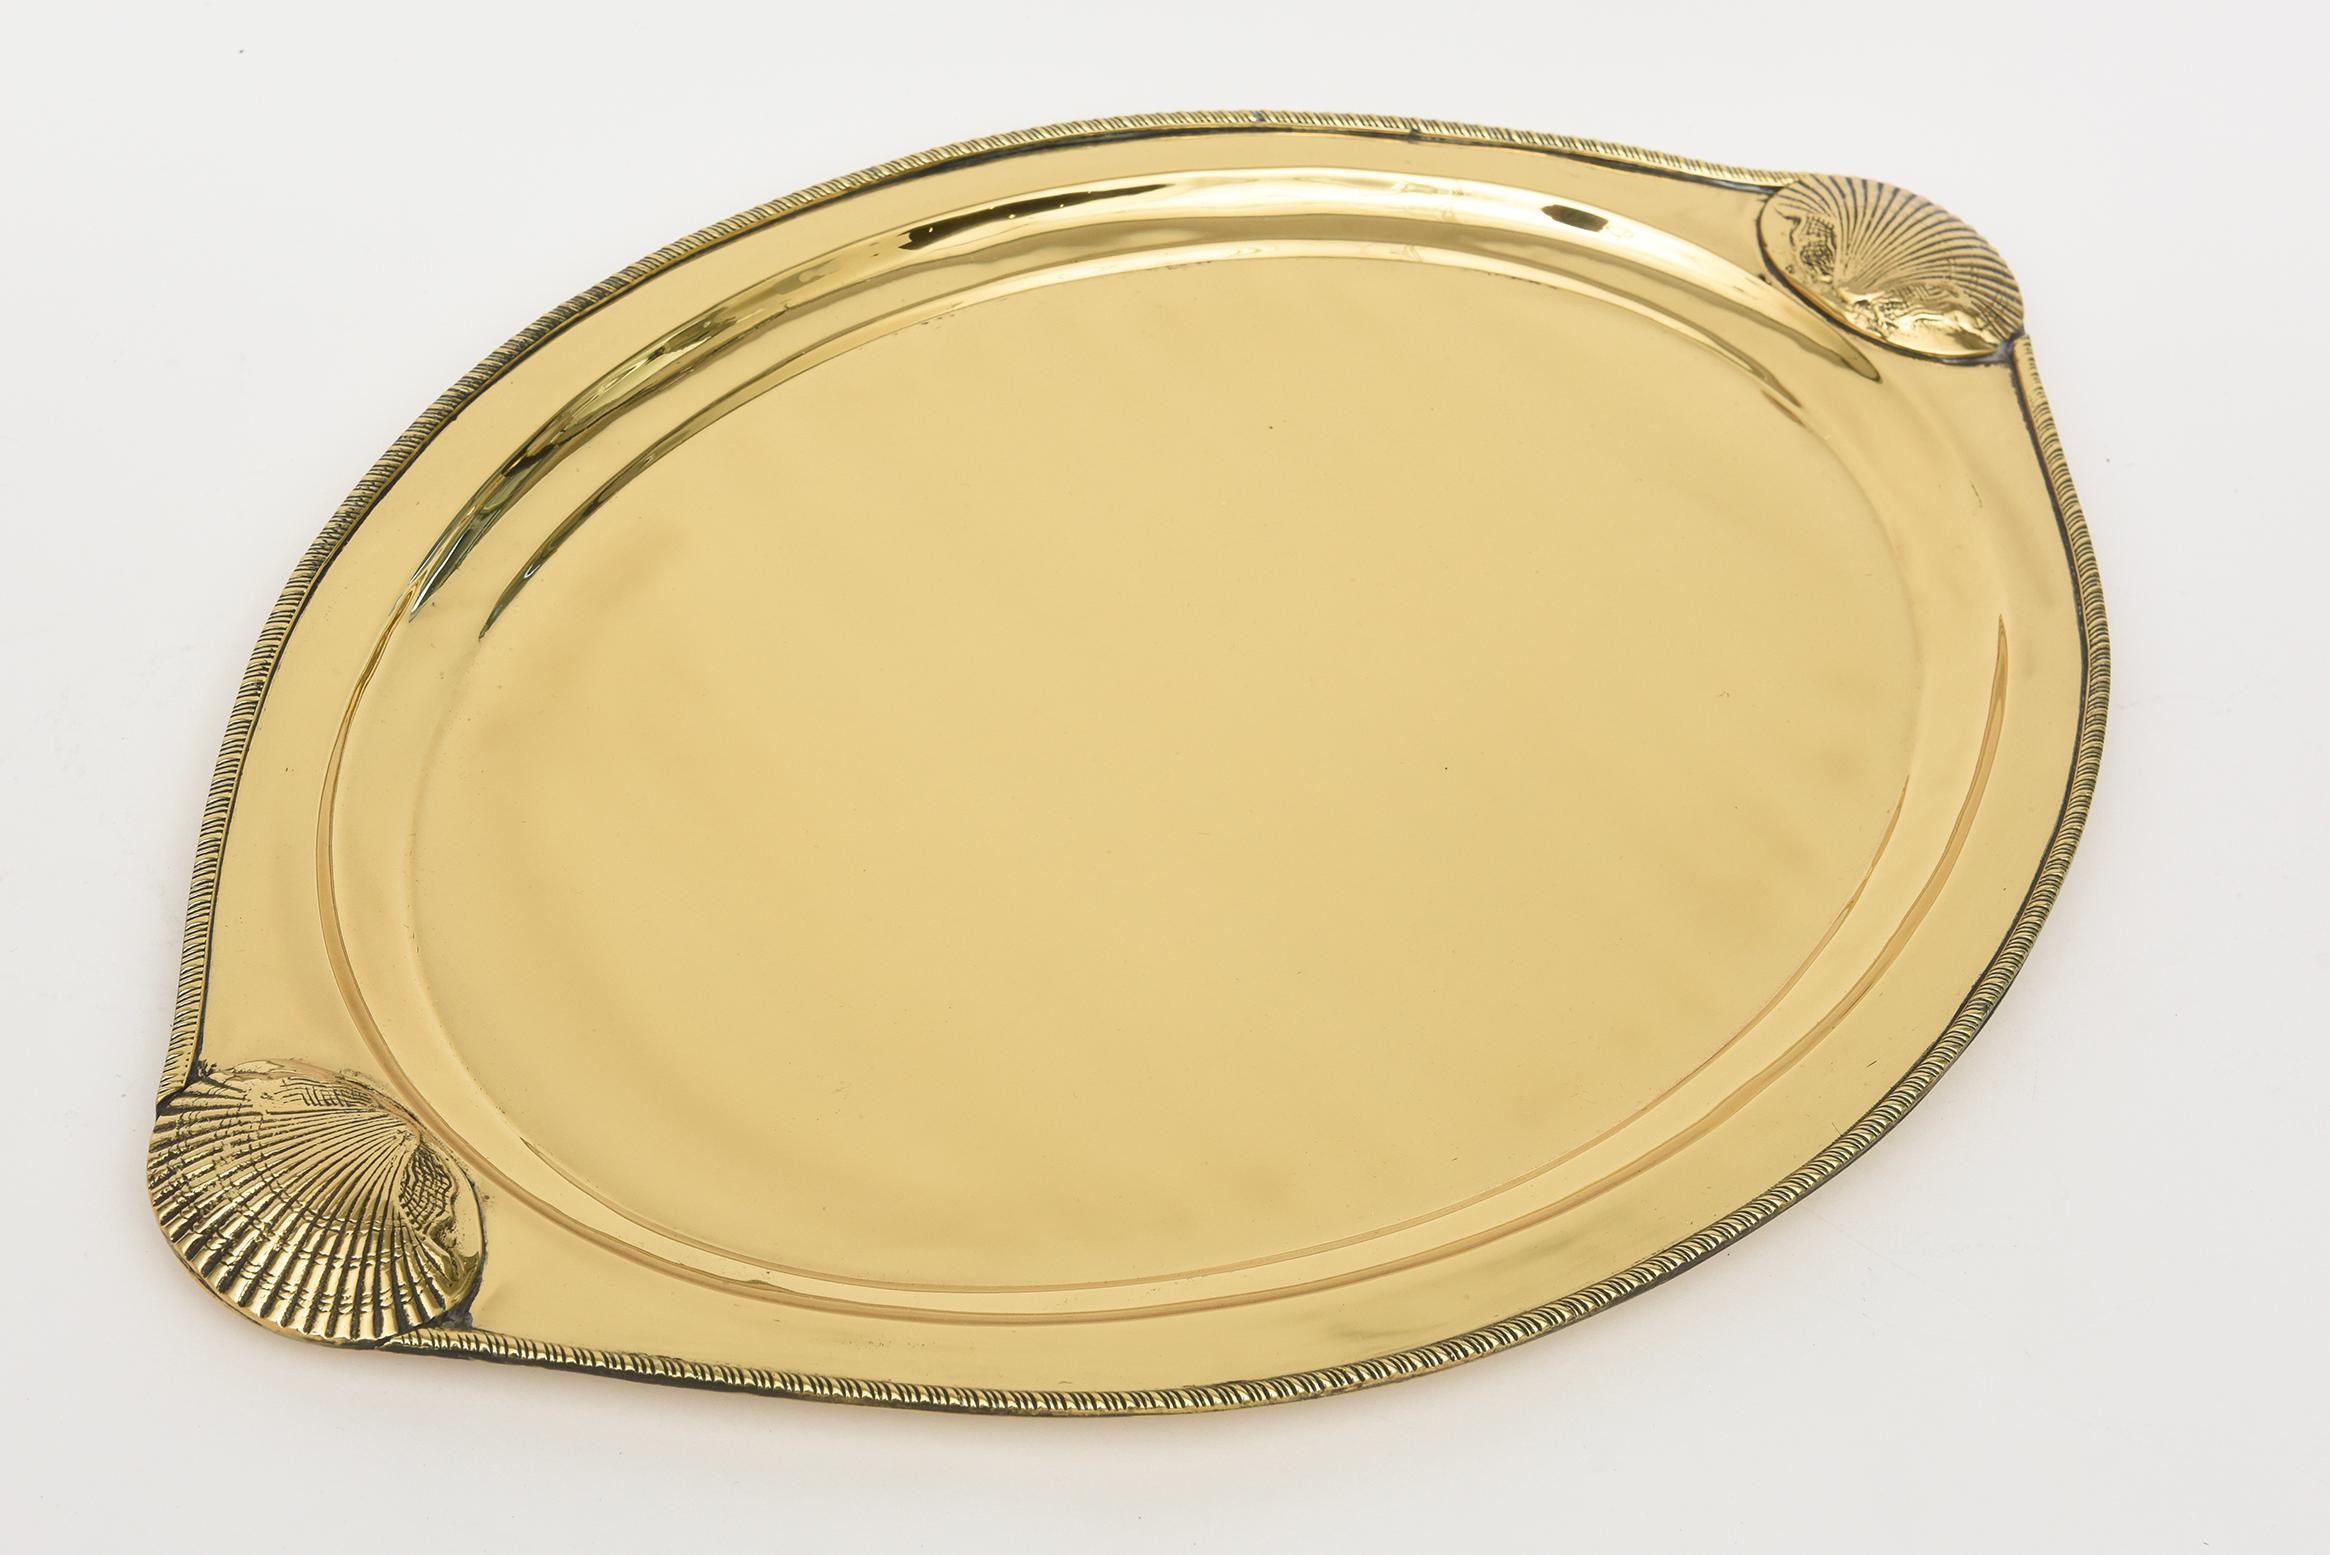 This vintage lovely brass oval tray has embellishments of shell design at either end along with a spiral braided perimeter. It is from the 70's and a great size. it was polished and then lacquered so it will not tarnish. Great barware and for your